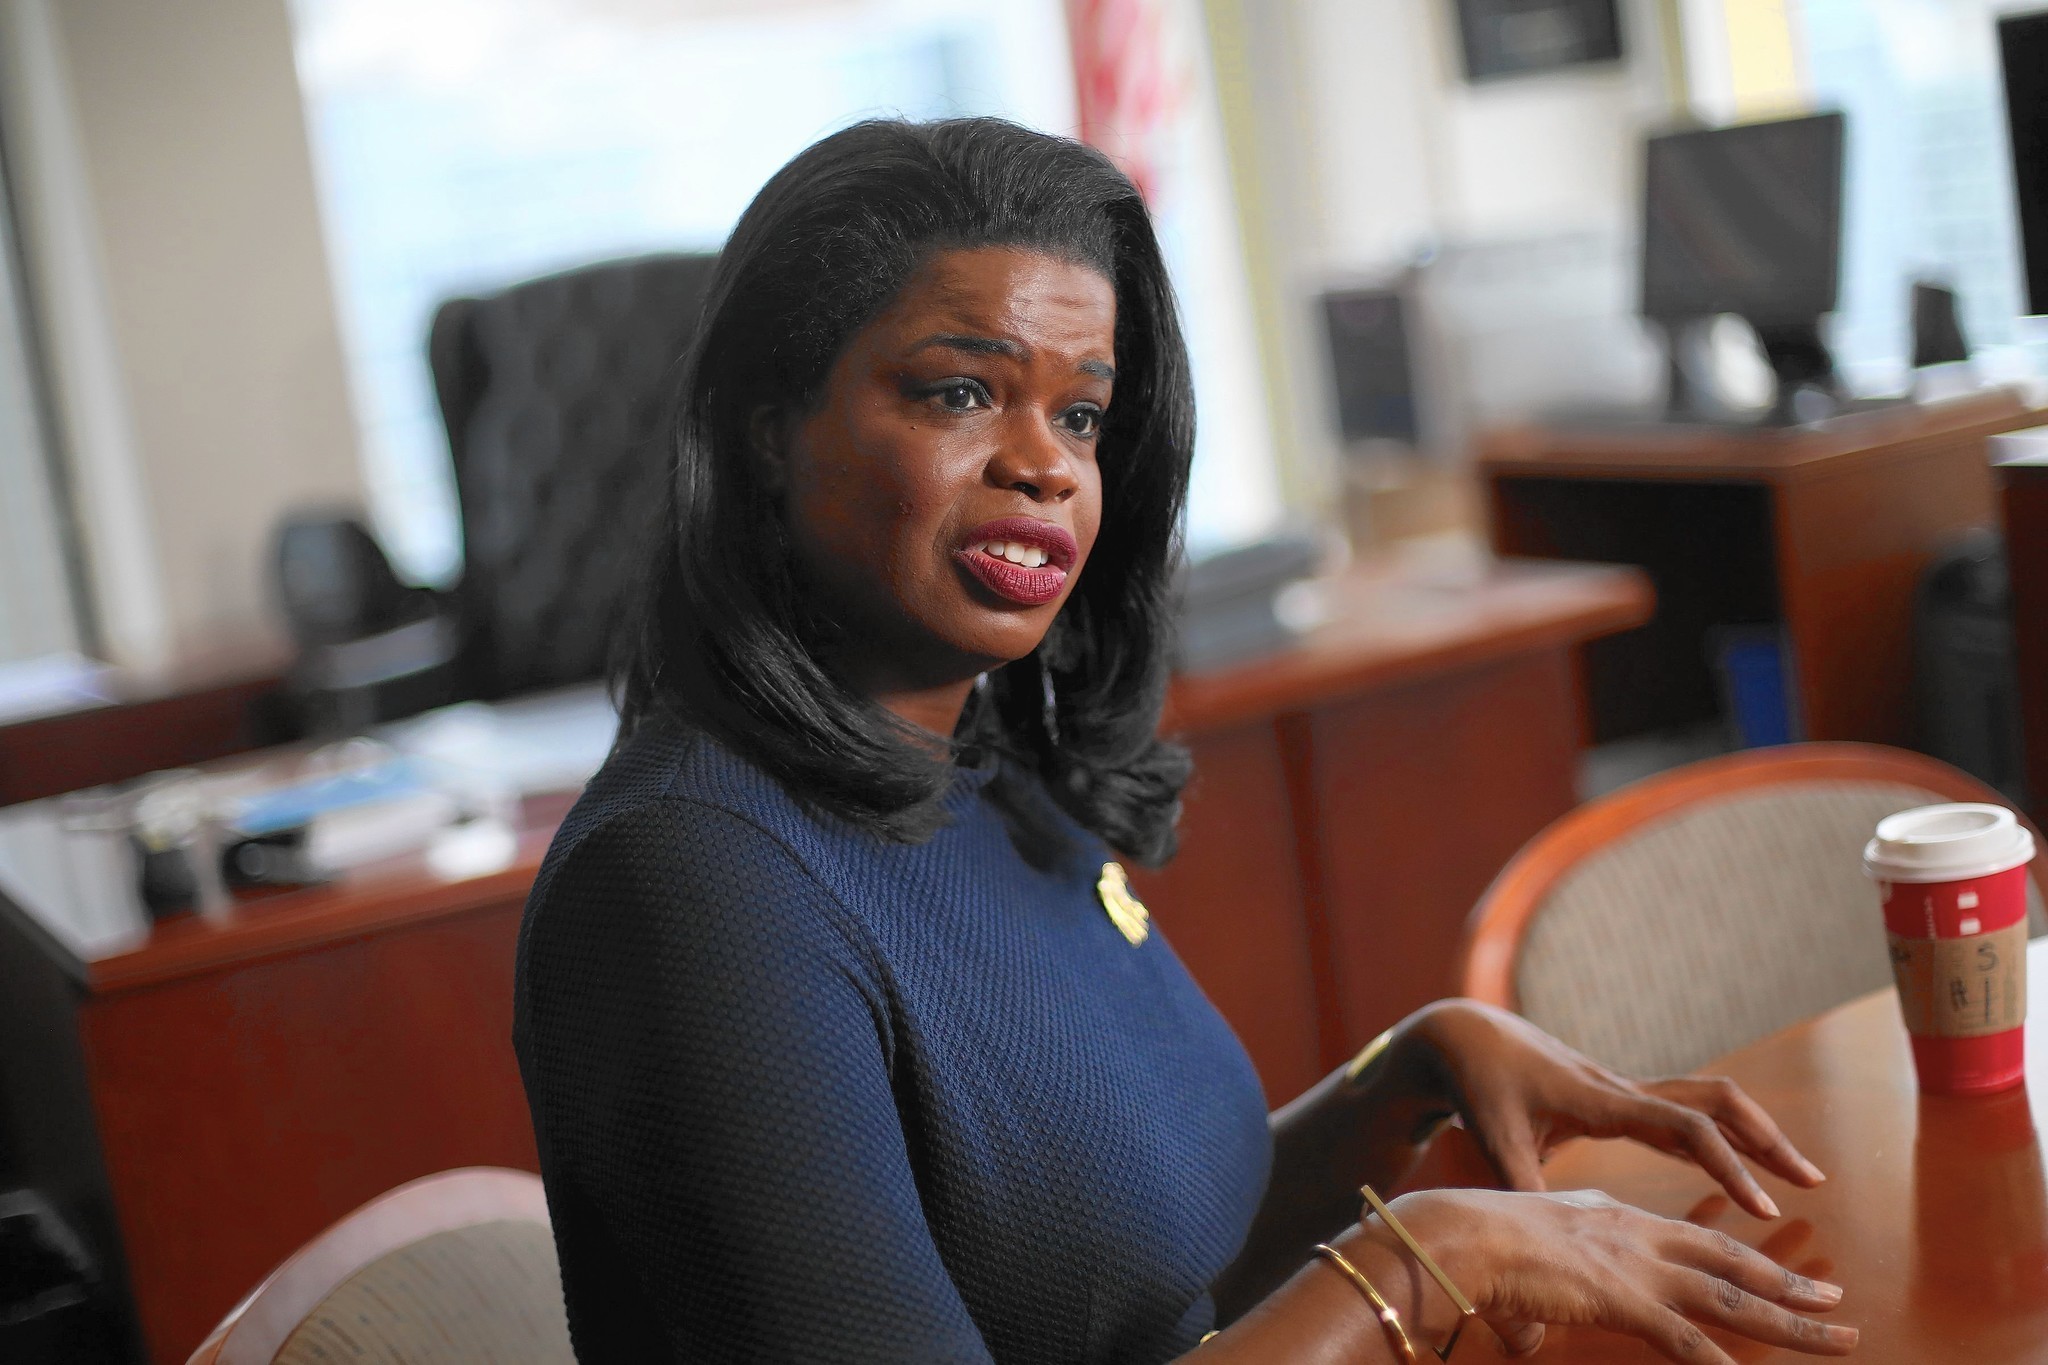 Rapping to Jay Z, Netflix and chilling: How Kim Foxx winds down ... - Chicago Tribune